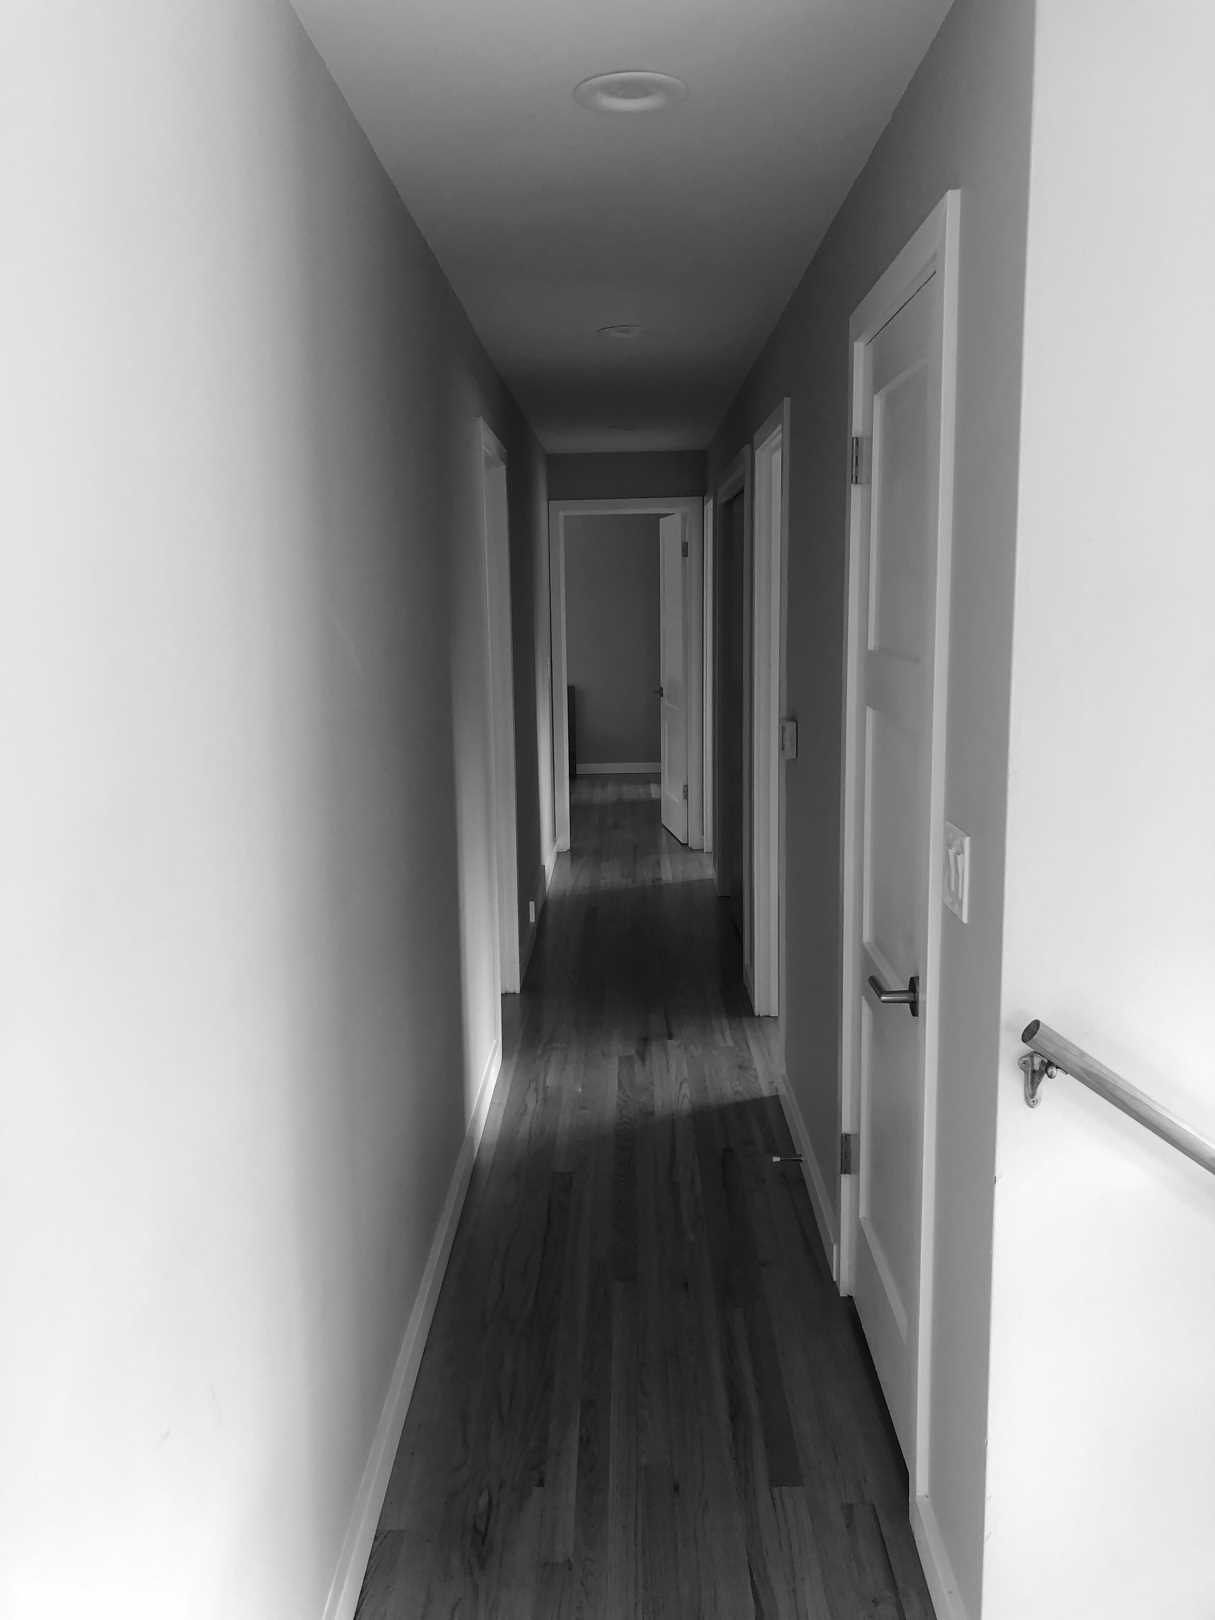 Before - The original hallway was dark and plain, with doors to a bedroom and bathrooms.